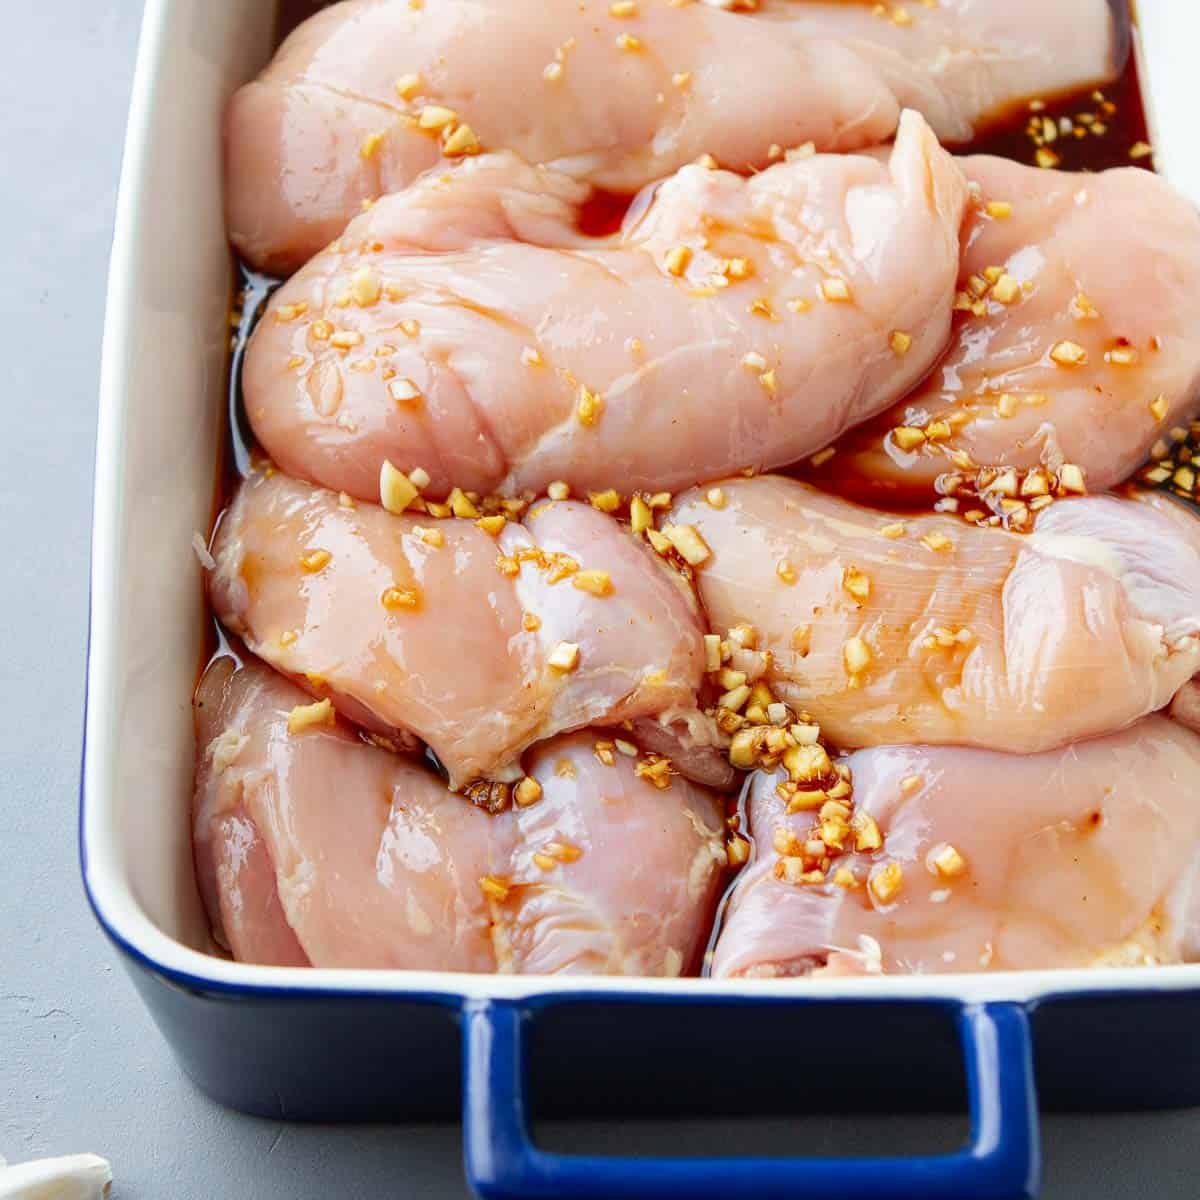 Raw chicken thighs and breasts with a marinade in a baking dish.